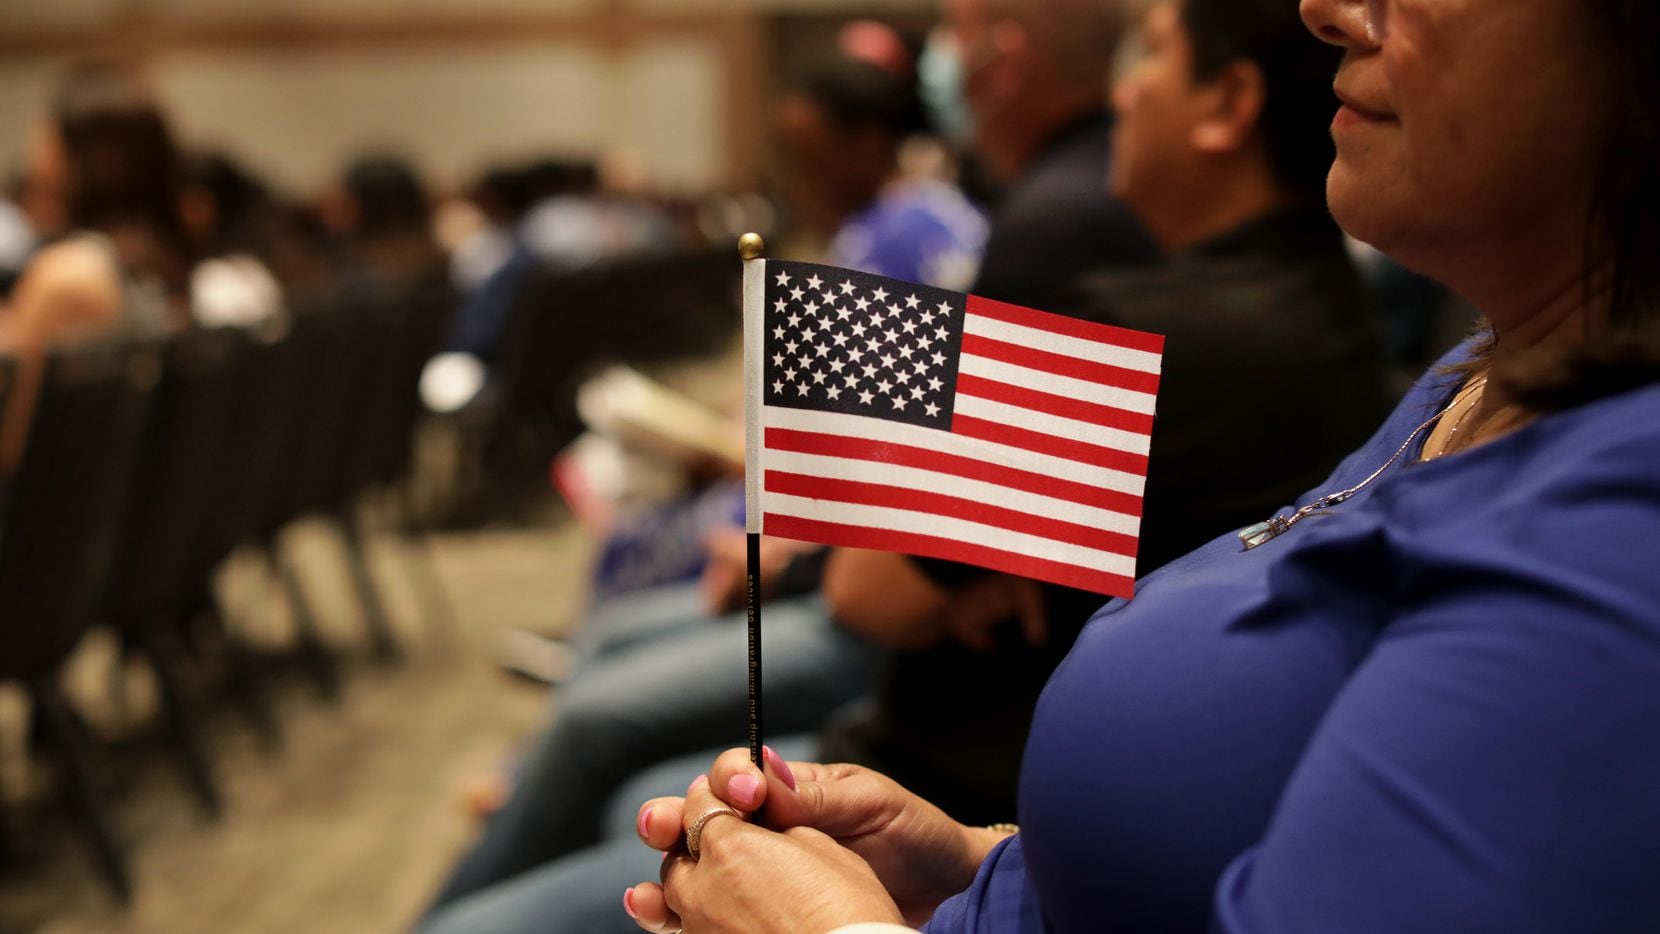 About 650 people took part in a U.S. citizenship ceremony at the Plano Event Center in May.